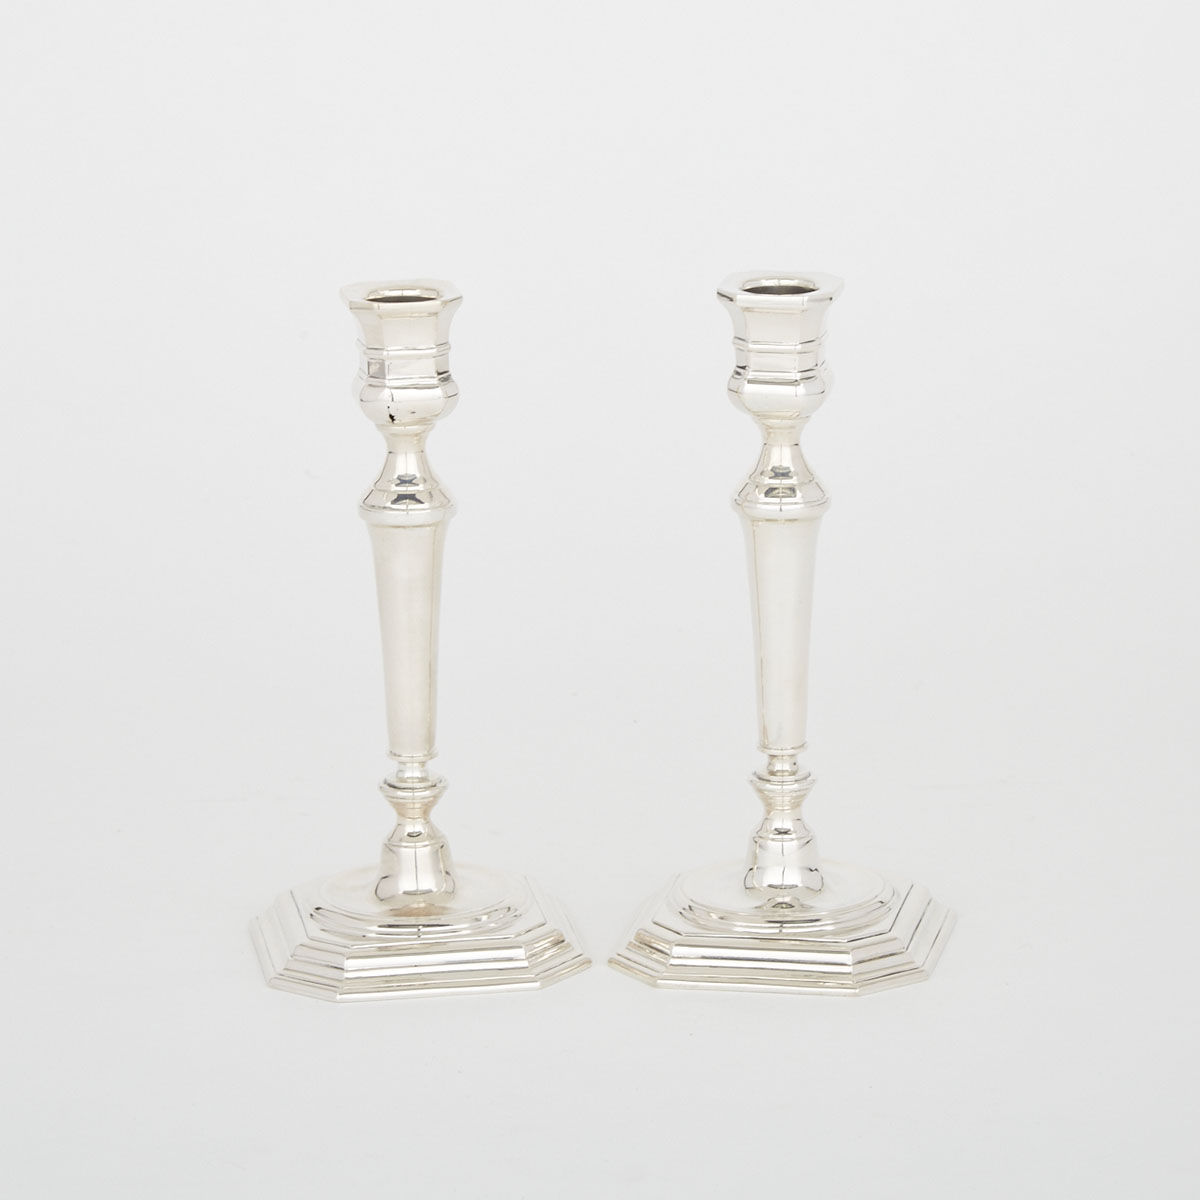 Pair of Italian Silver Table Candlesticks, 20th century